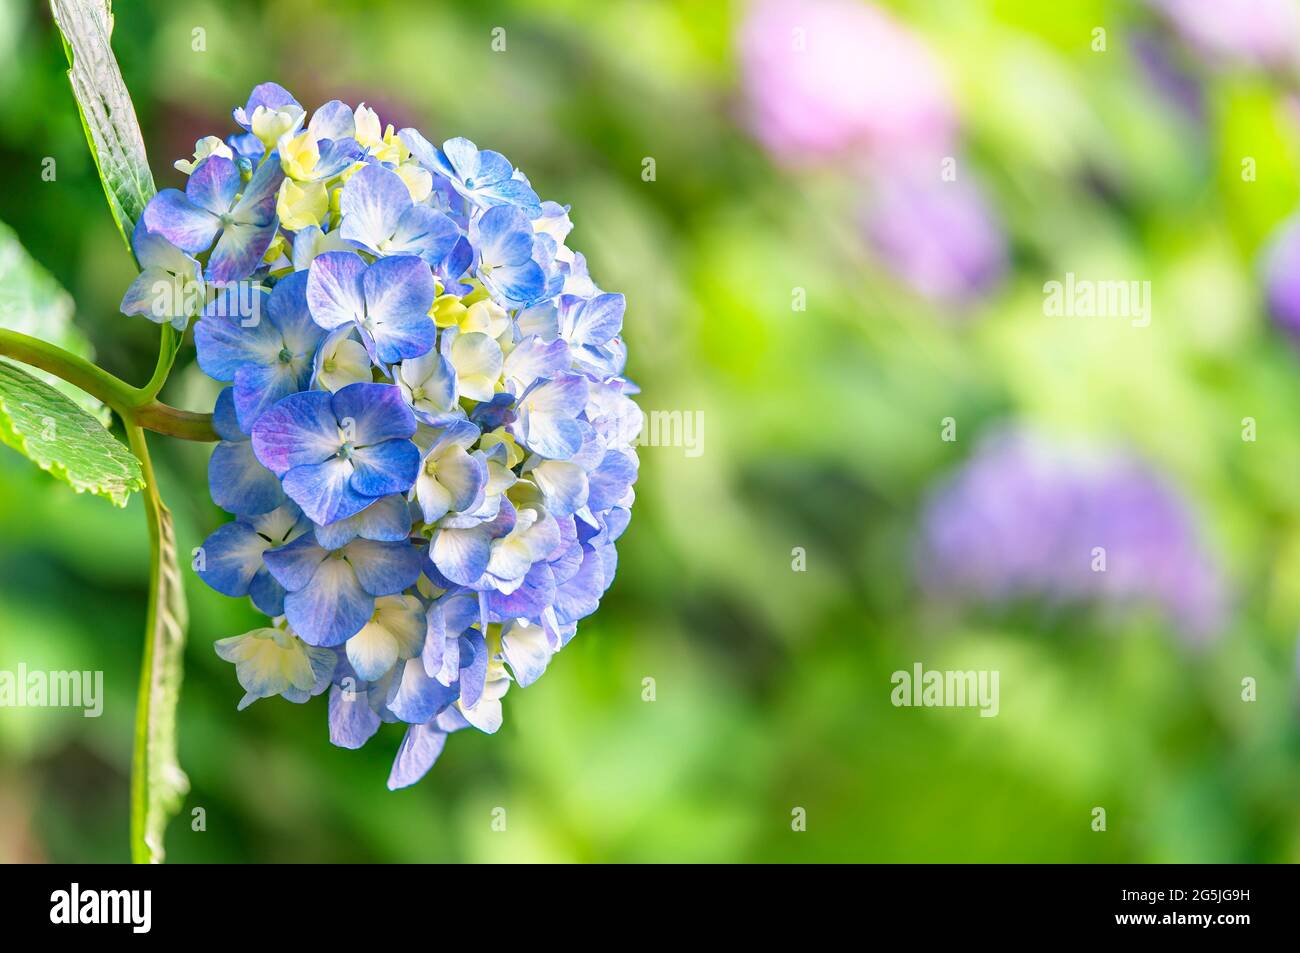 Close Up On A Japanese Blue Hydrangea Flower Called Ajisai Or Hon Ajisai Blossoming At Asuka No Komichi Road Famous For Its In Hortensias In Nishigaha Stock Photo Alamy